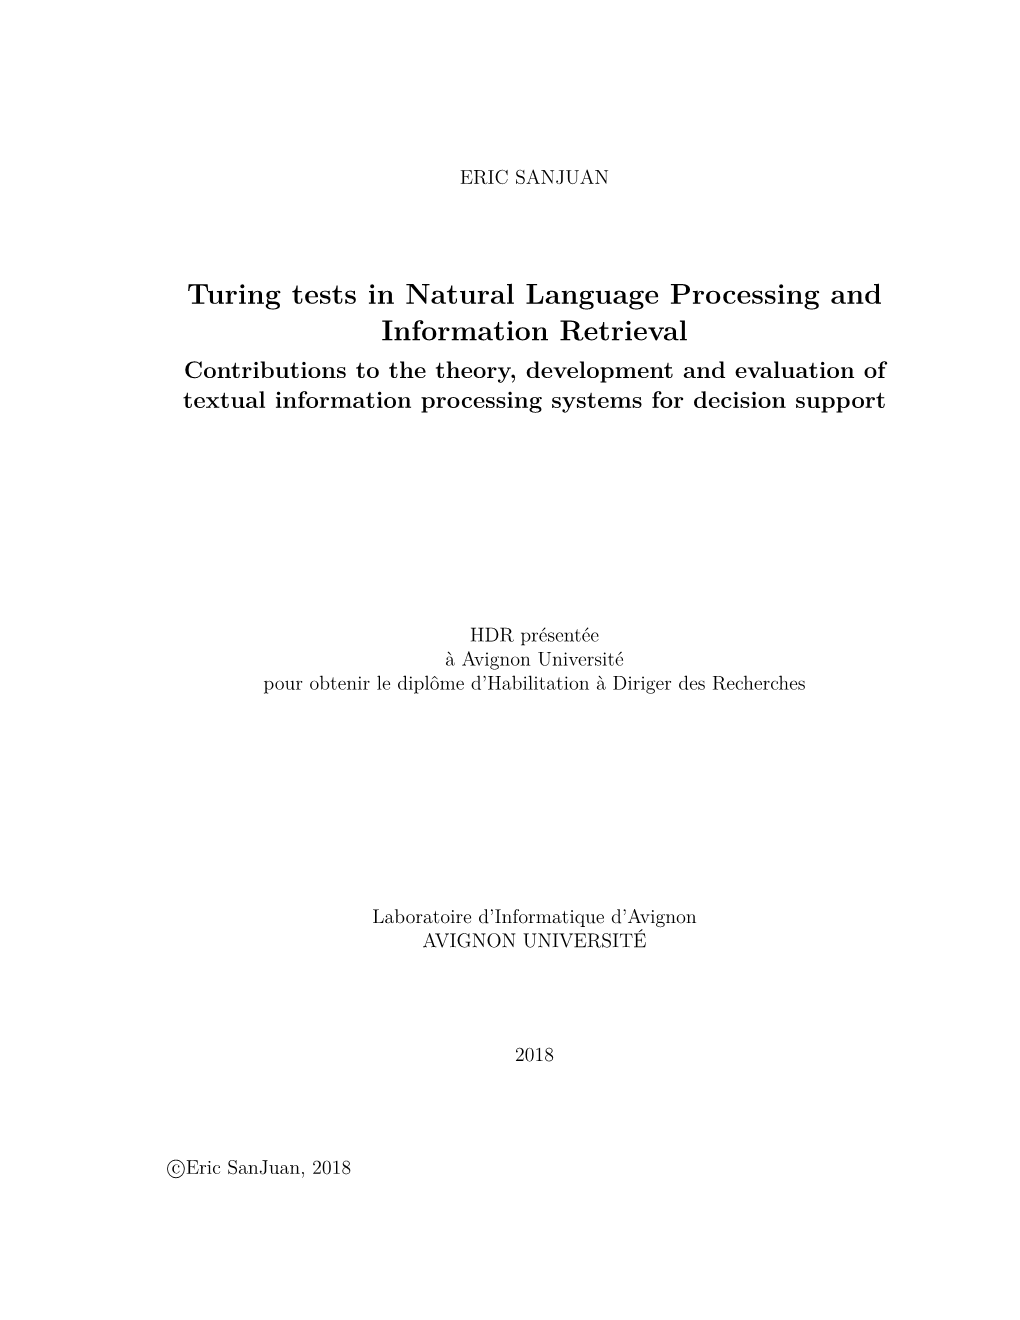 Turing Tests in Natural Language Processing And